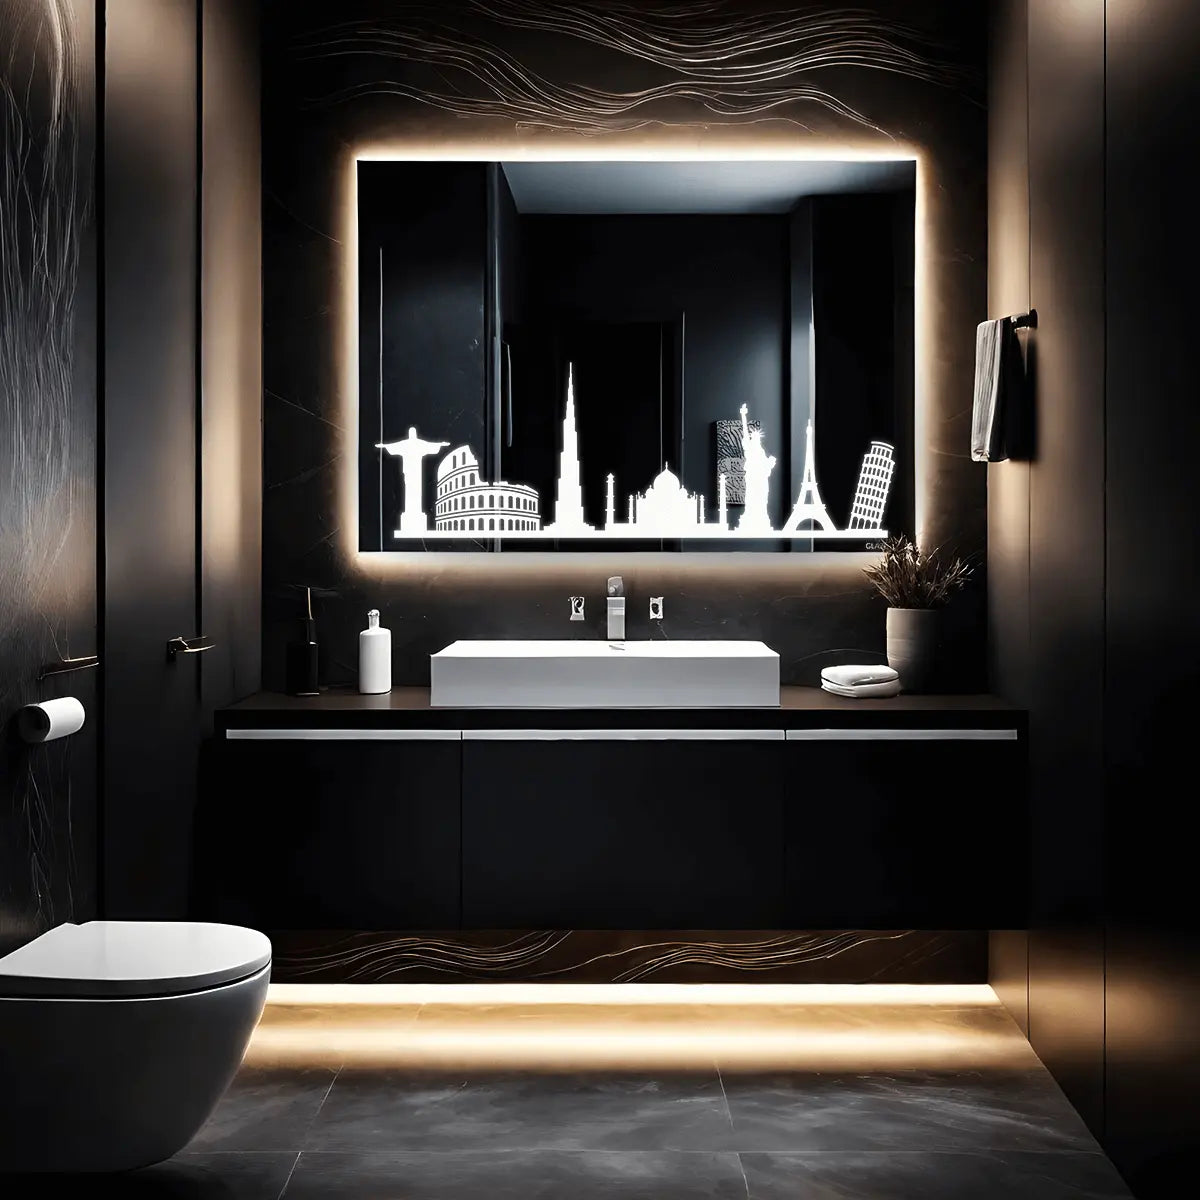 A bathroom vanity with a large rectangular LED mirror mounted on the wall. Behind the mirror is a black and white silhouette of a city skyline. A single sink with a chrome faucet sits below the mirror.